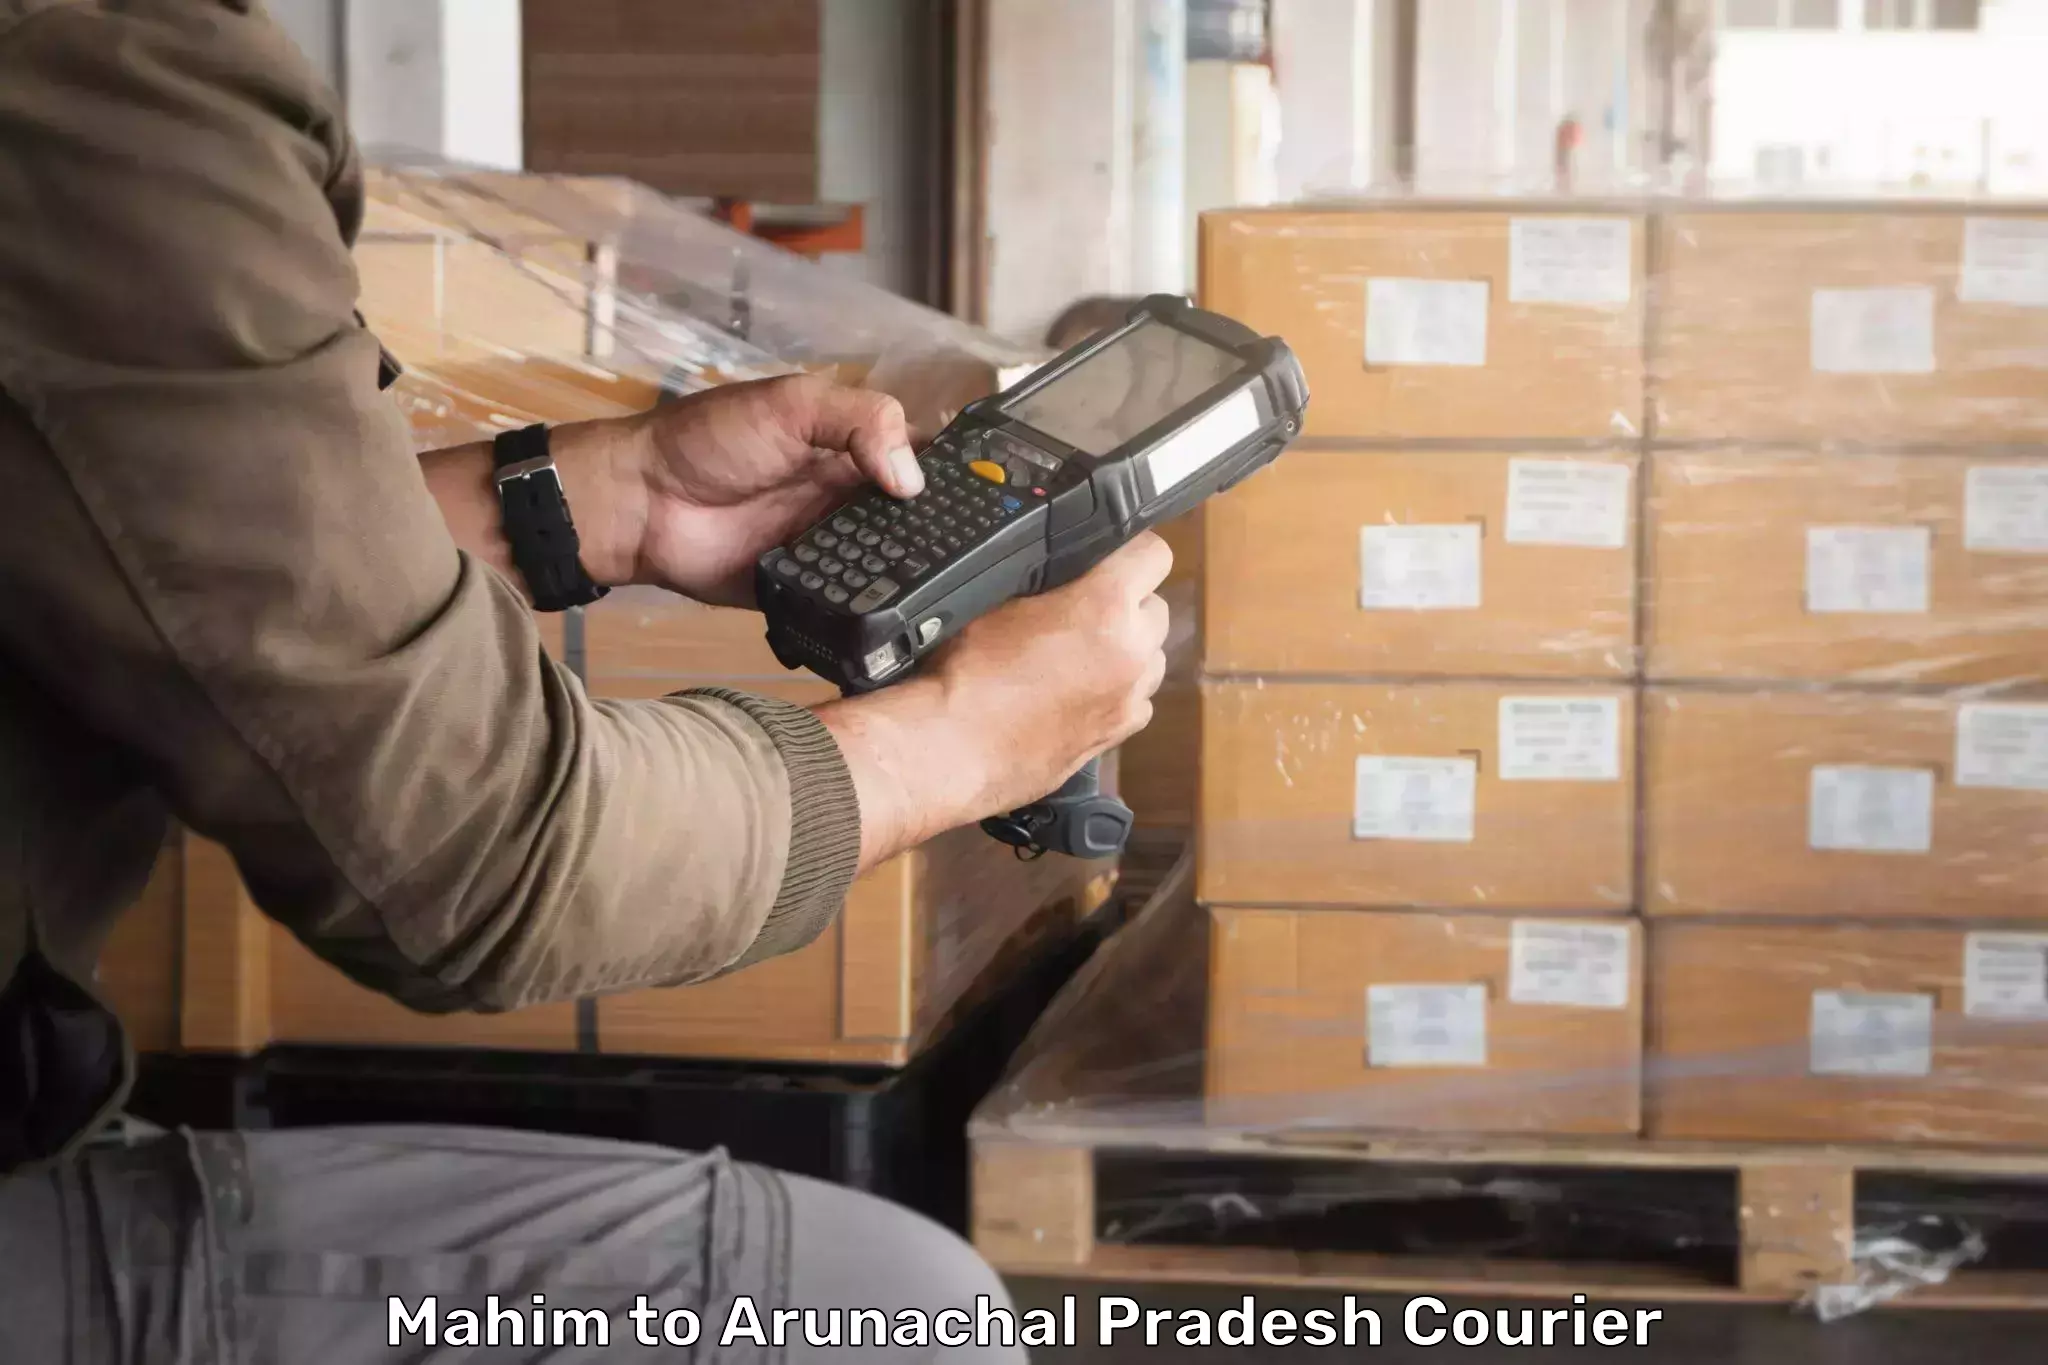 State-of-the-art courier technology Mahim to Roing